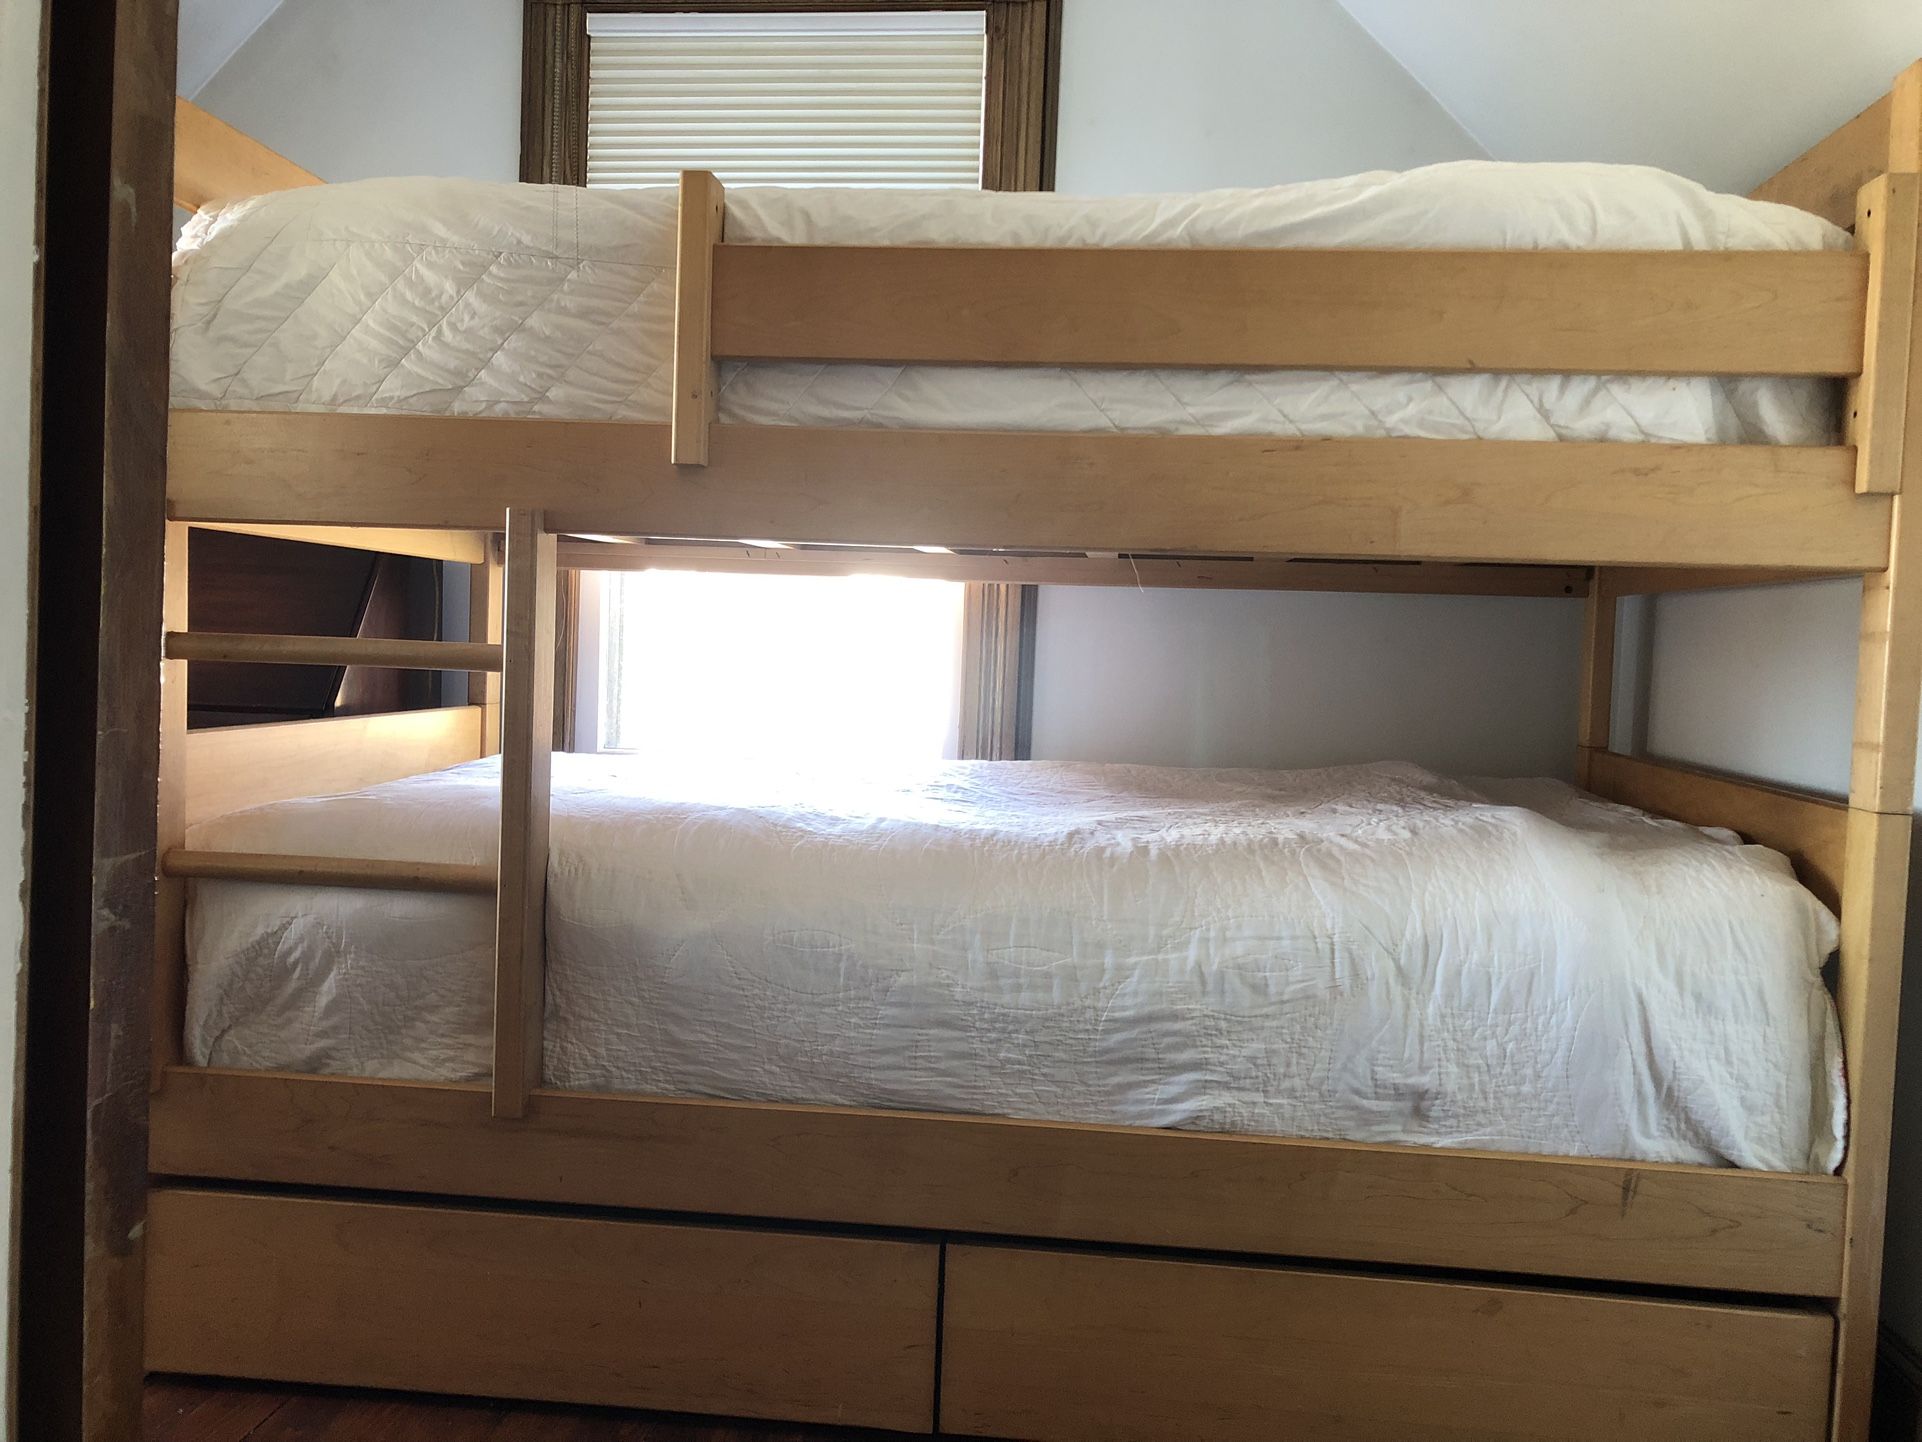 Bunk Beds,  Solid Maple Wood  